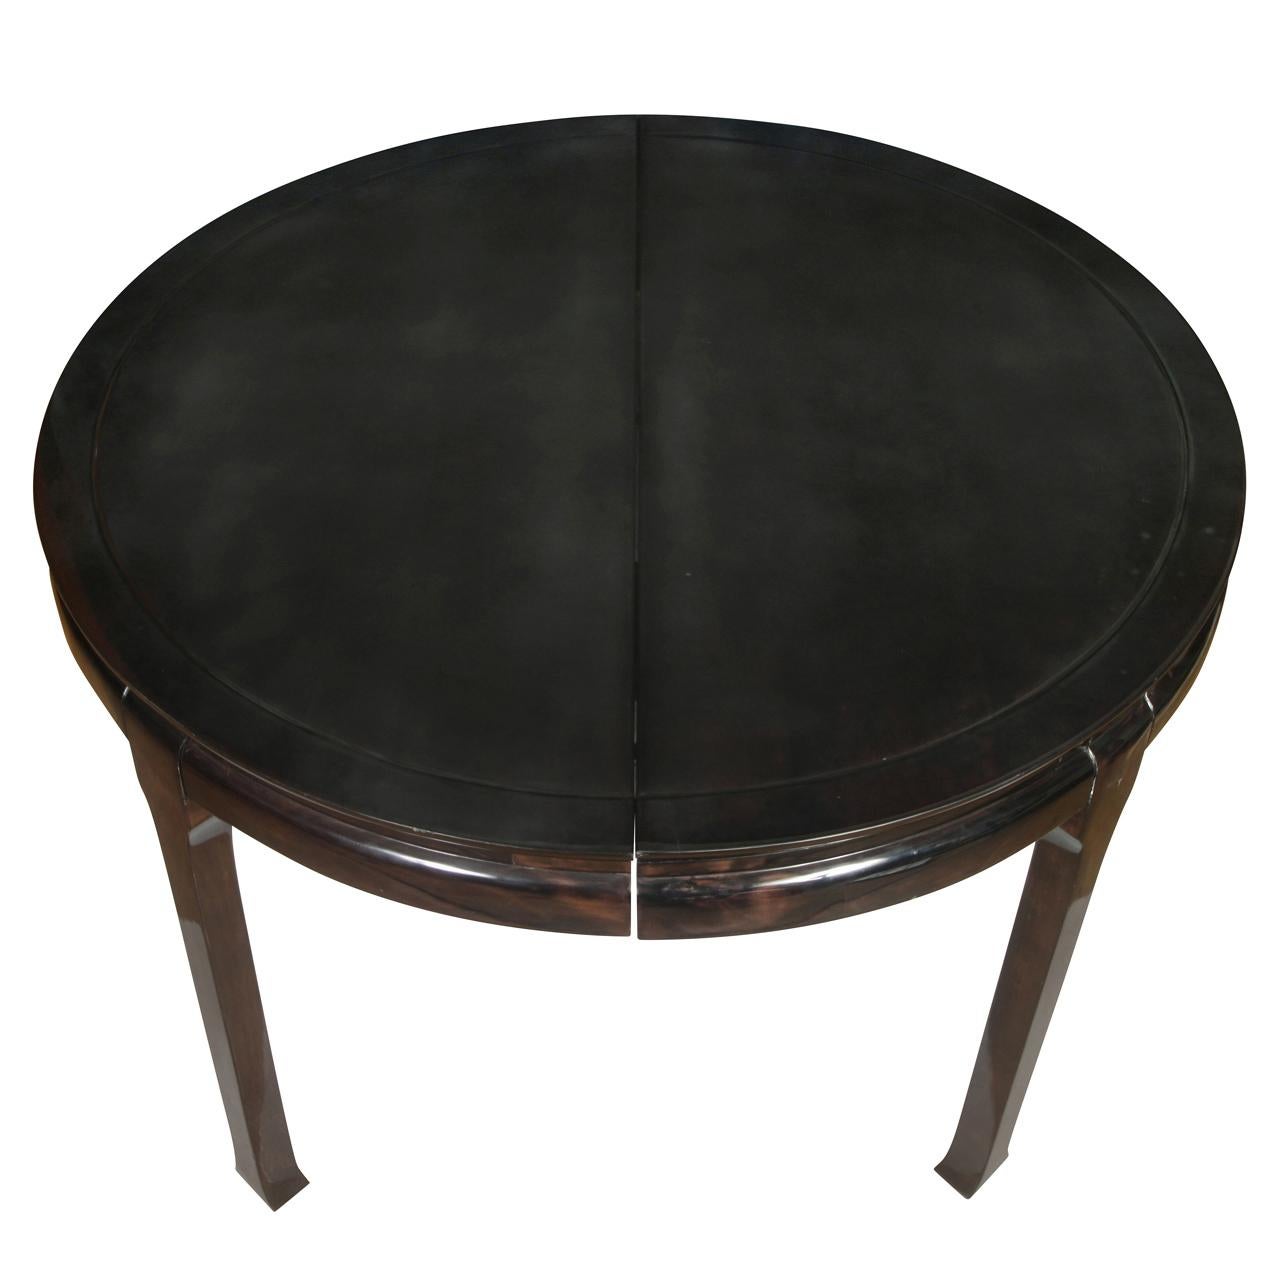 A Mid century Asian style round dining table with one leaf, lacquered black - brown finish. Includes one leaf, measures 20